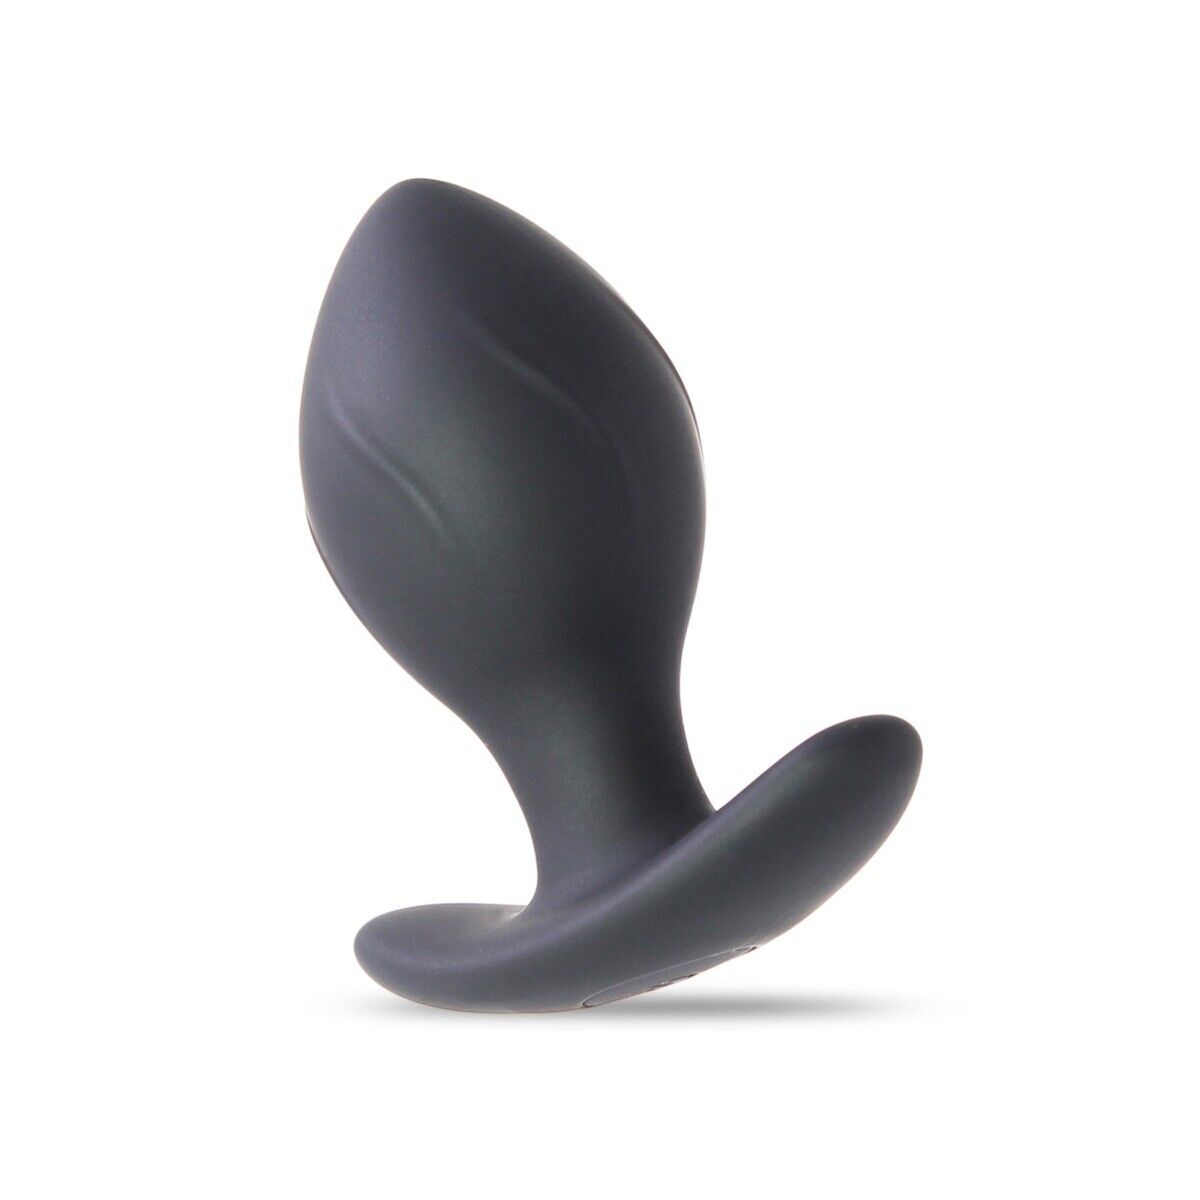 Wireless Remote Control Wearable Vibrating Anal Butt Plug Vibrator Sex Toy